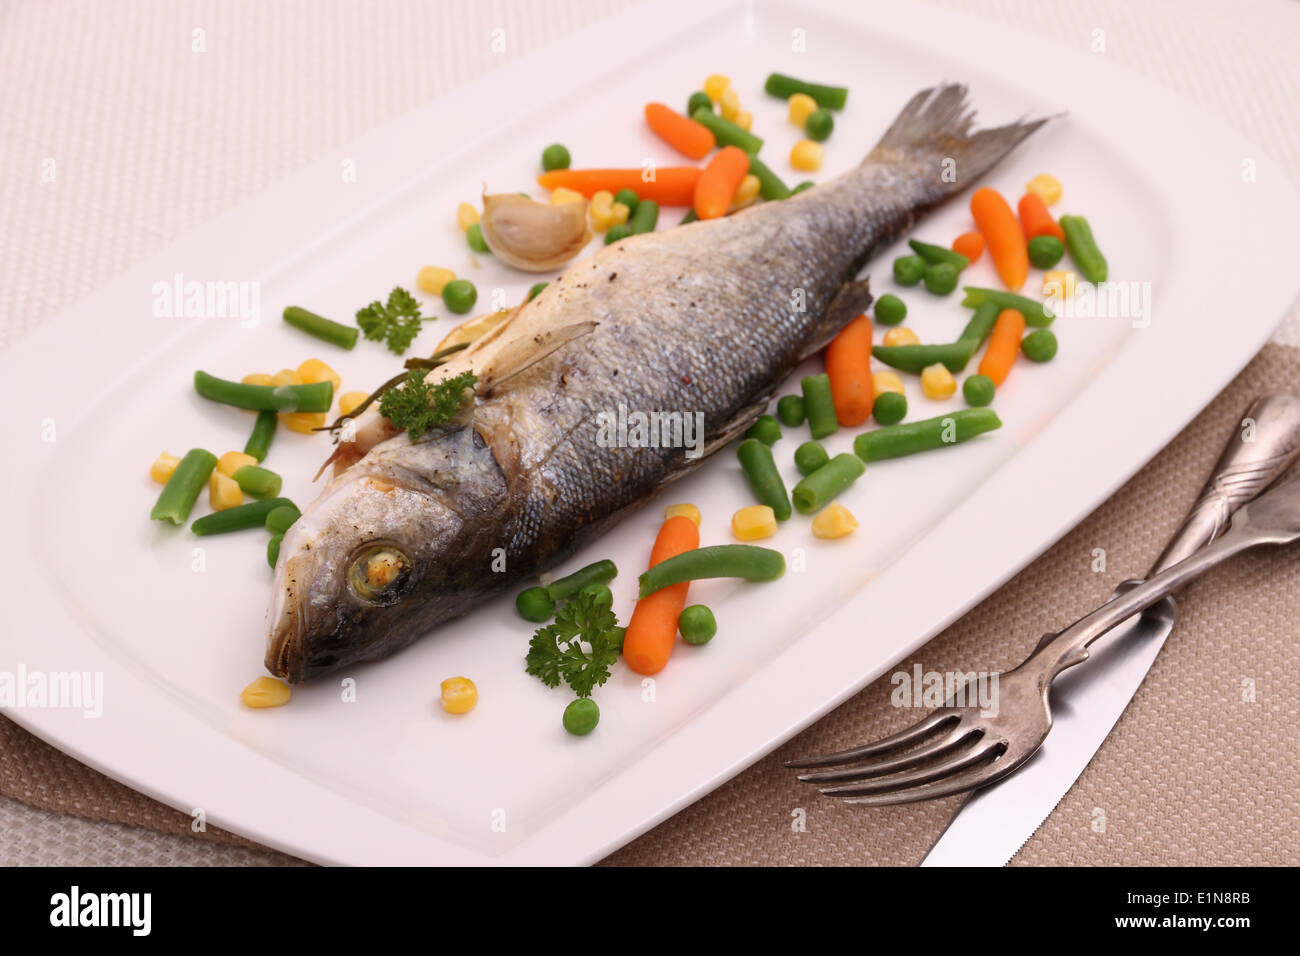 Fried whole sea bass with vegetables and lemon, close up Stock Photo